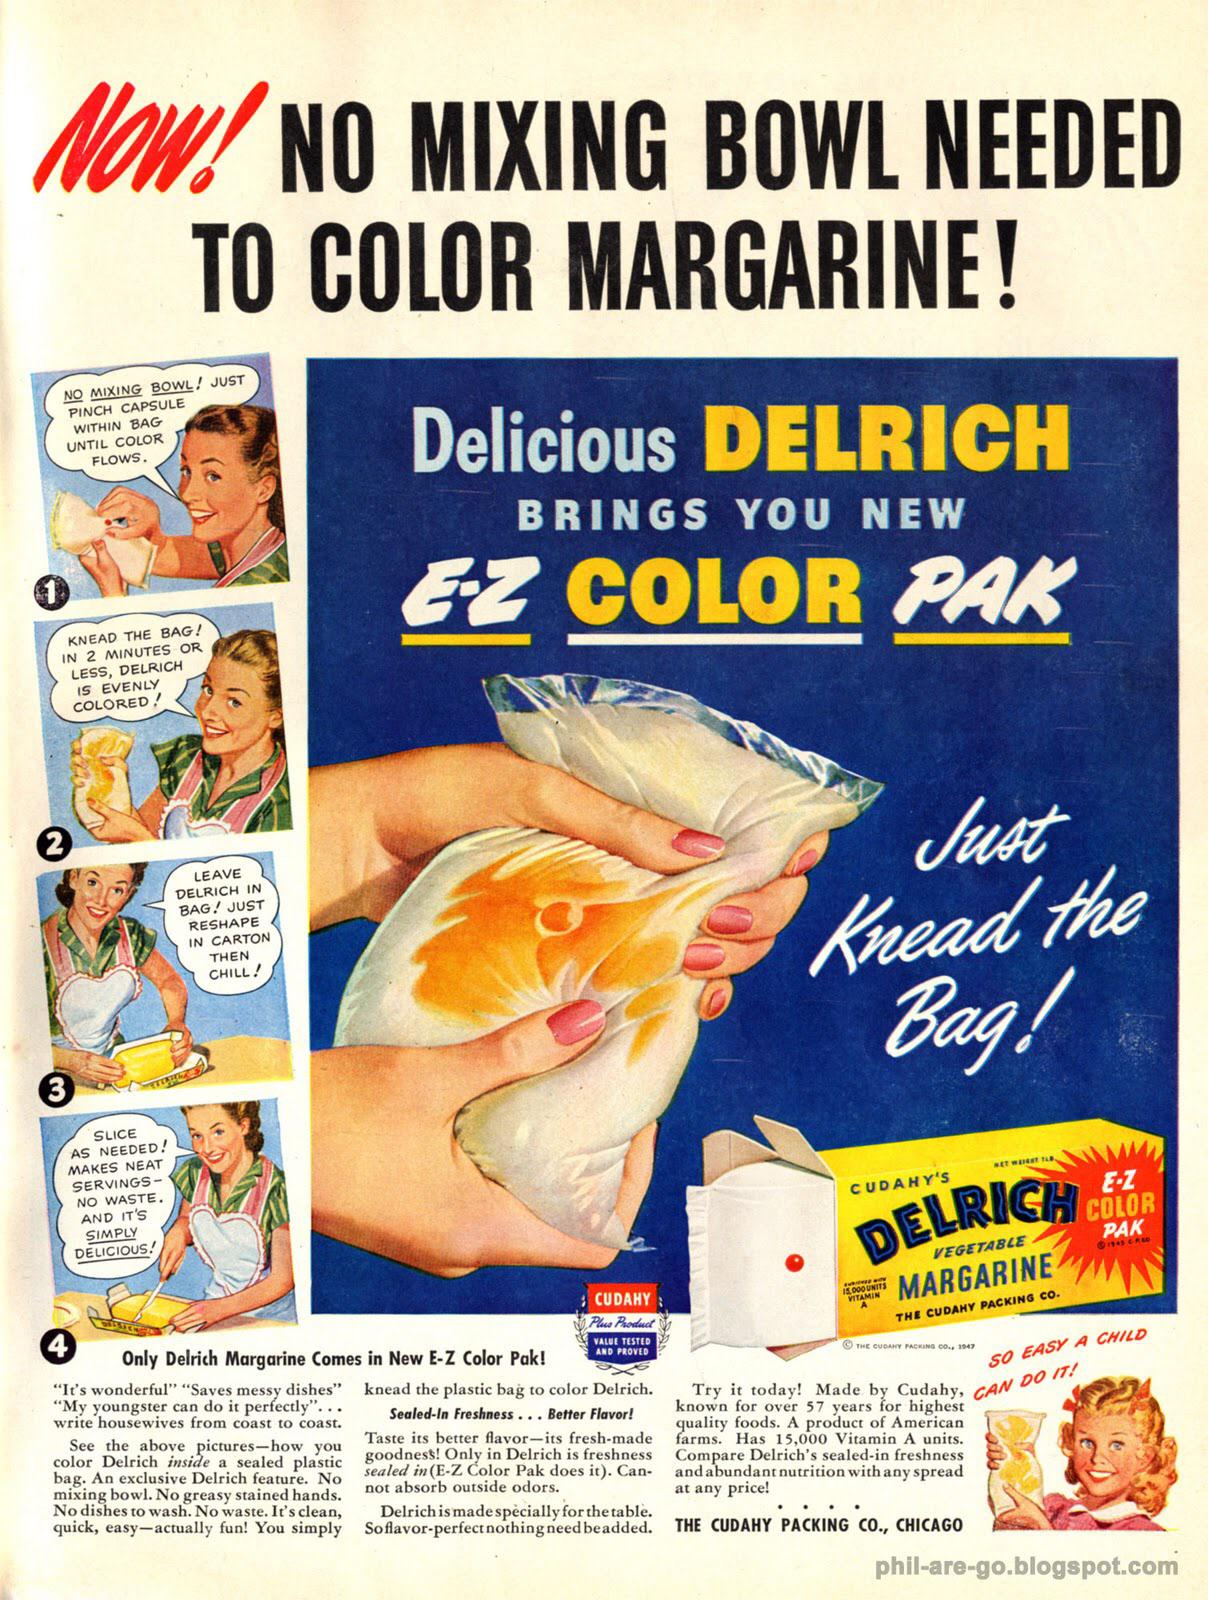 The c.1940s introduced colour changing margarine.